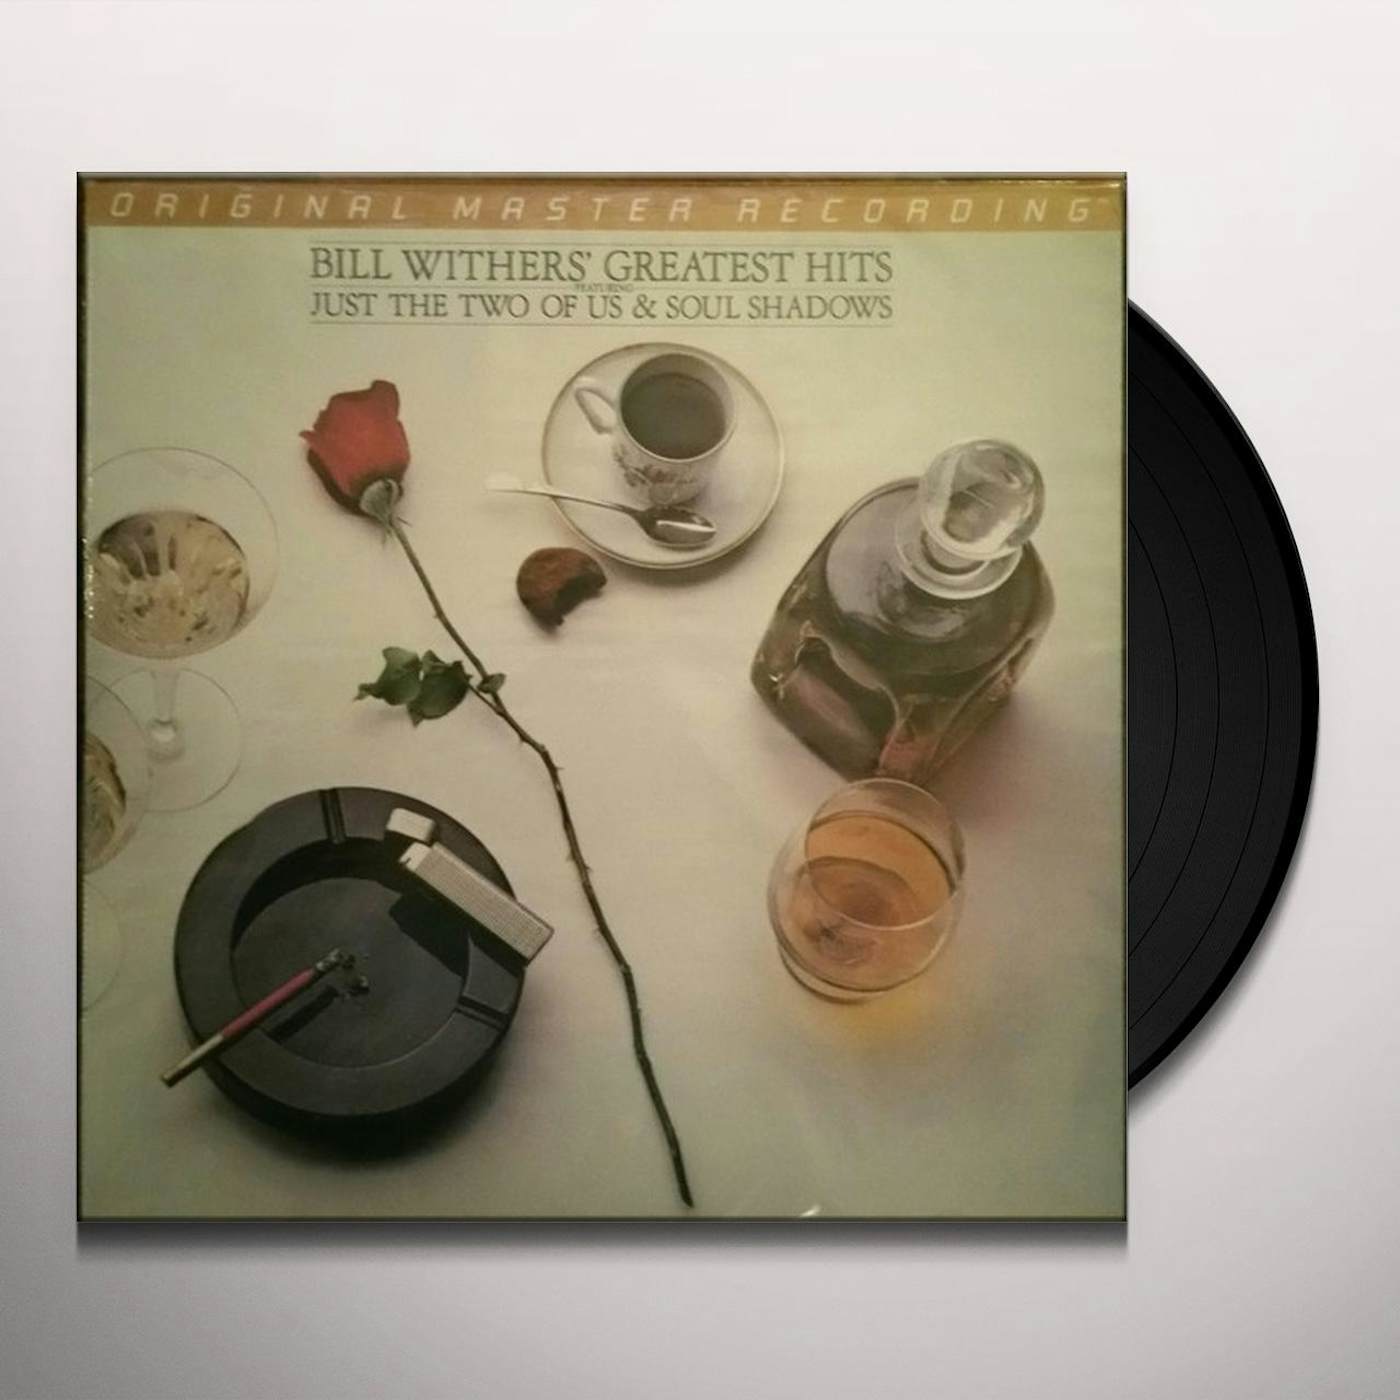 BILL WITHERS' HITS Vinyl Record